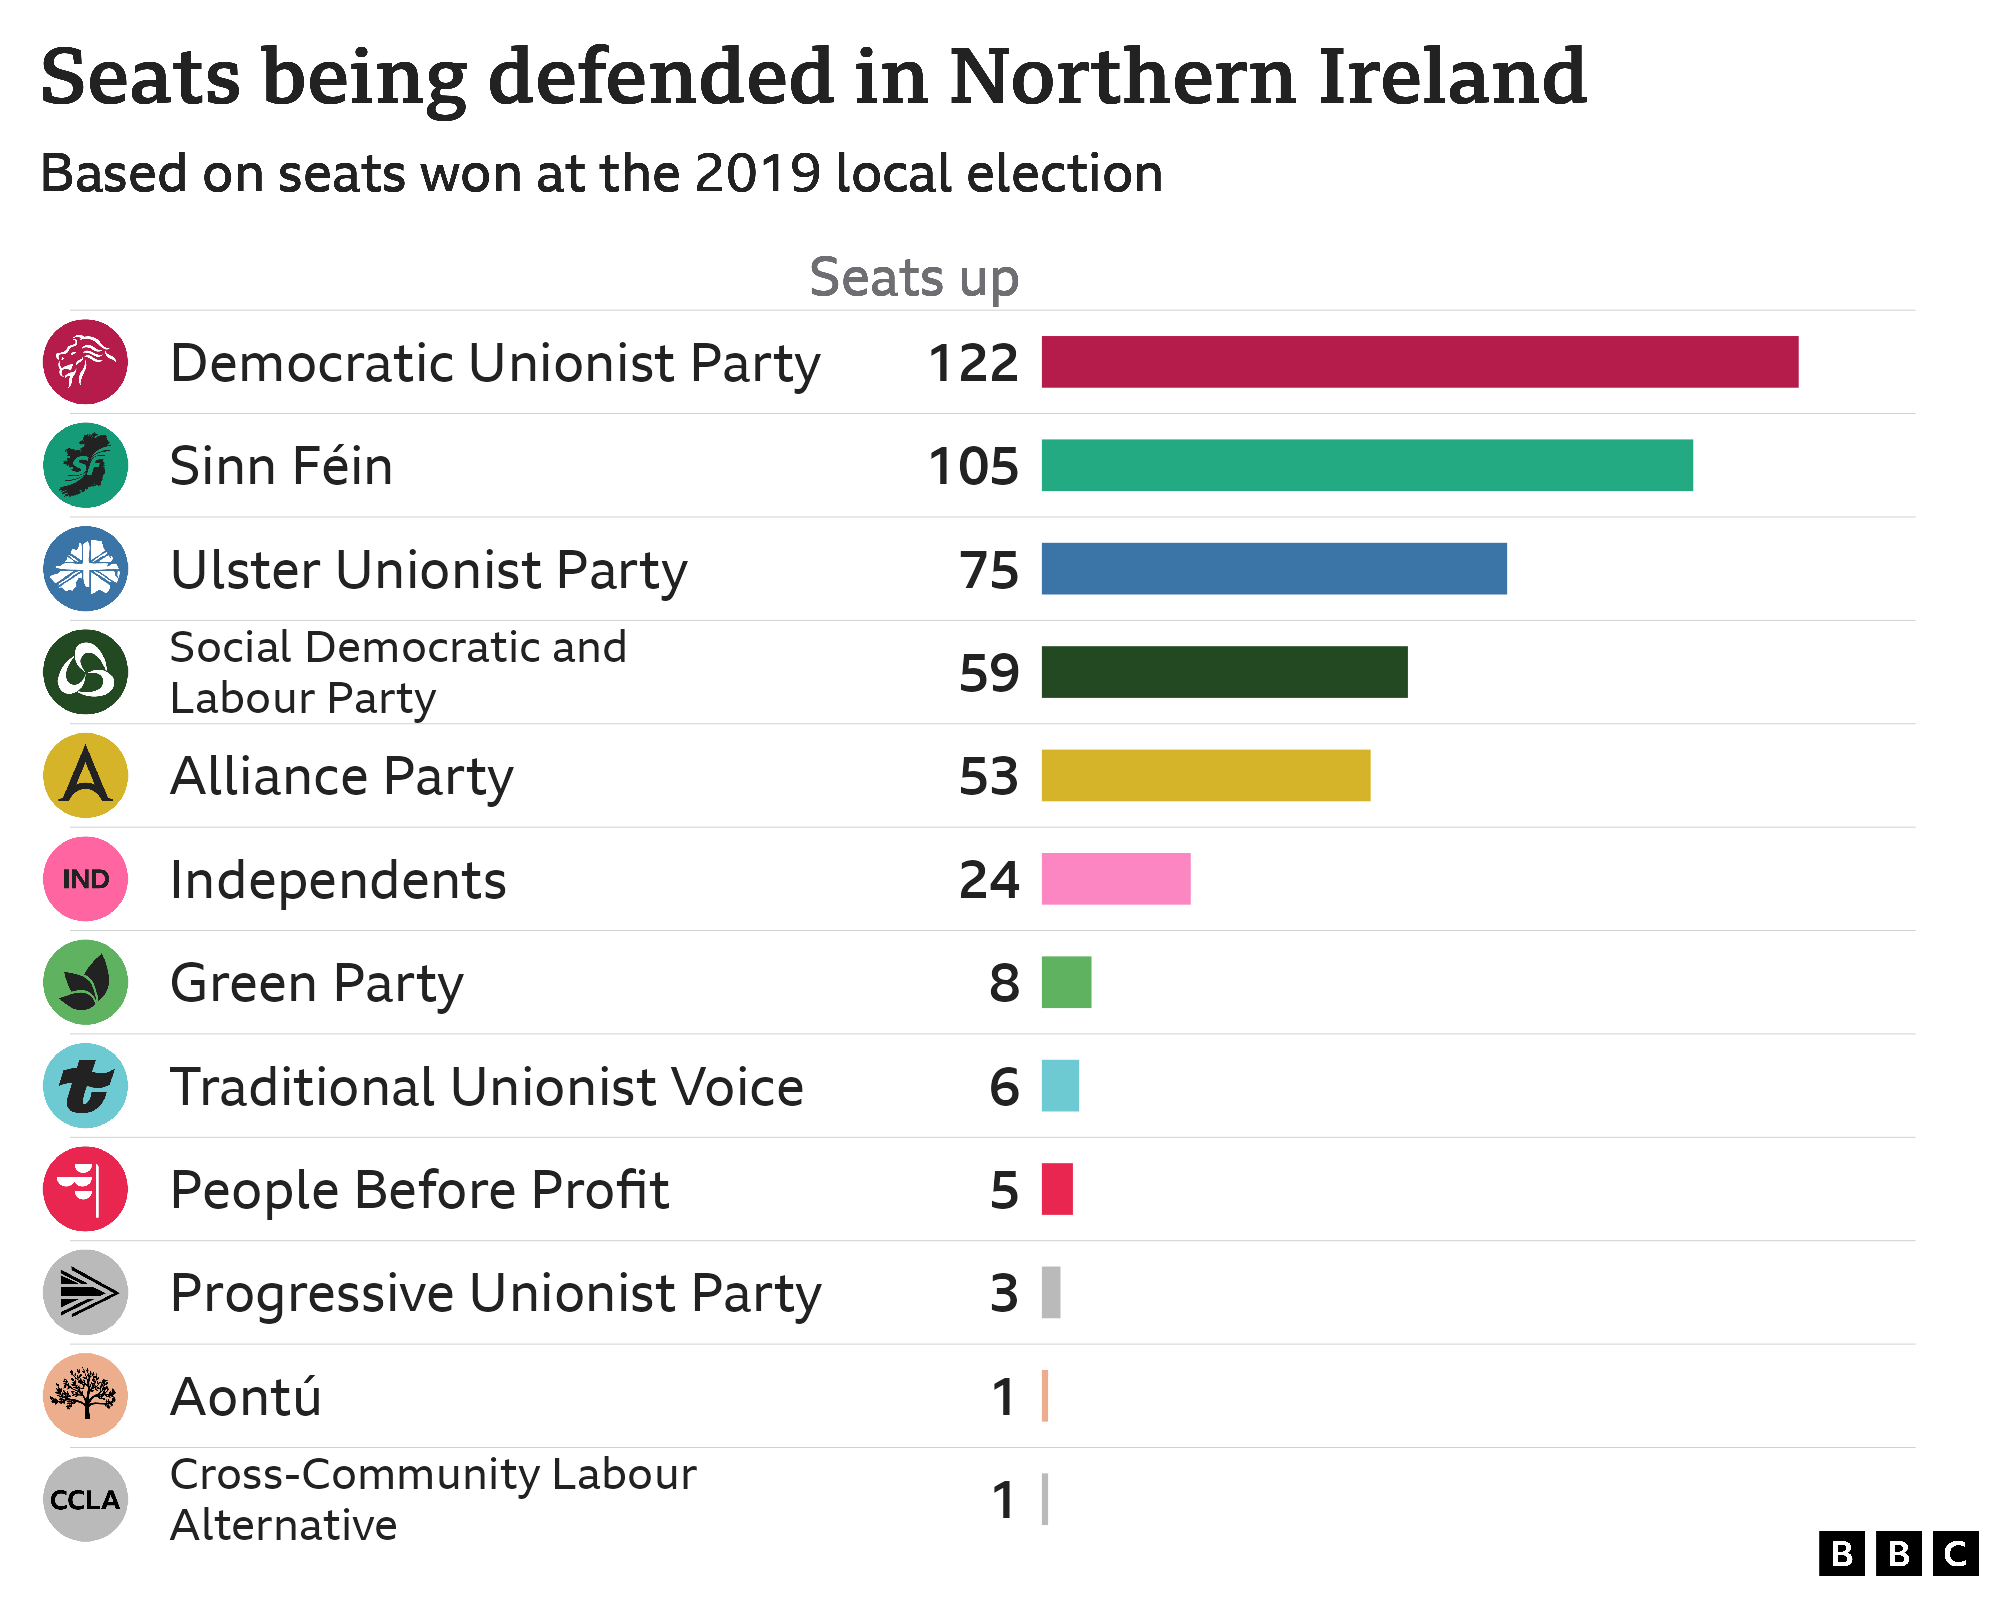 Bar chart showing council seats defended by each party in Northern Ireland, Democratic Unionist Party 122, Sinn Fein 105, Ulster Unionist Party 75, Social Democratic and Labour Party 59, Alliance Party 53, Independents 24, Green Party 8, Traditional Unionist Voice 6, People Before Profit 5, Progressive Unionist Party 3, Aontu 1, Cross-Community Labour Alternative 1